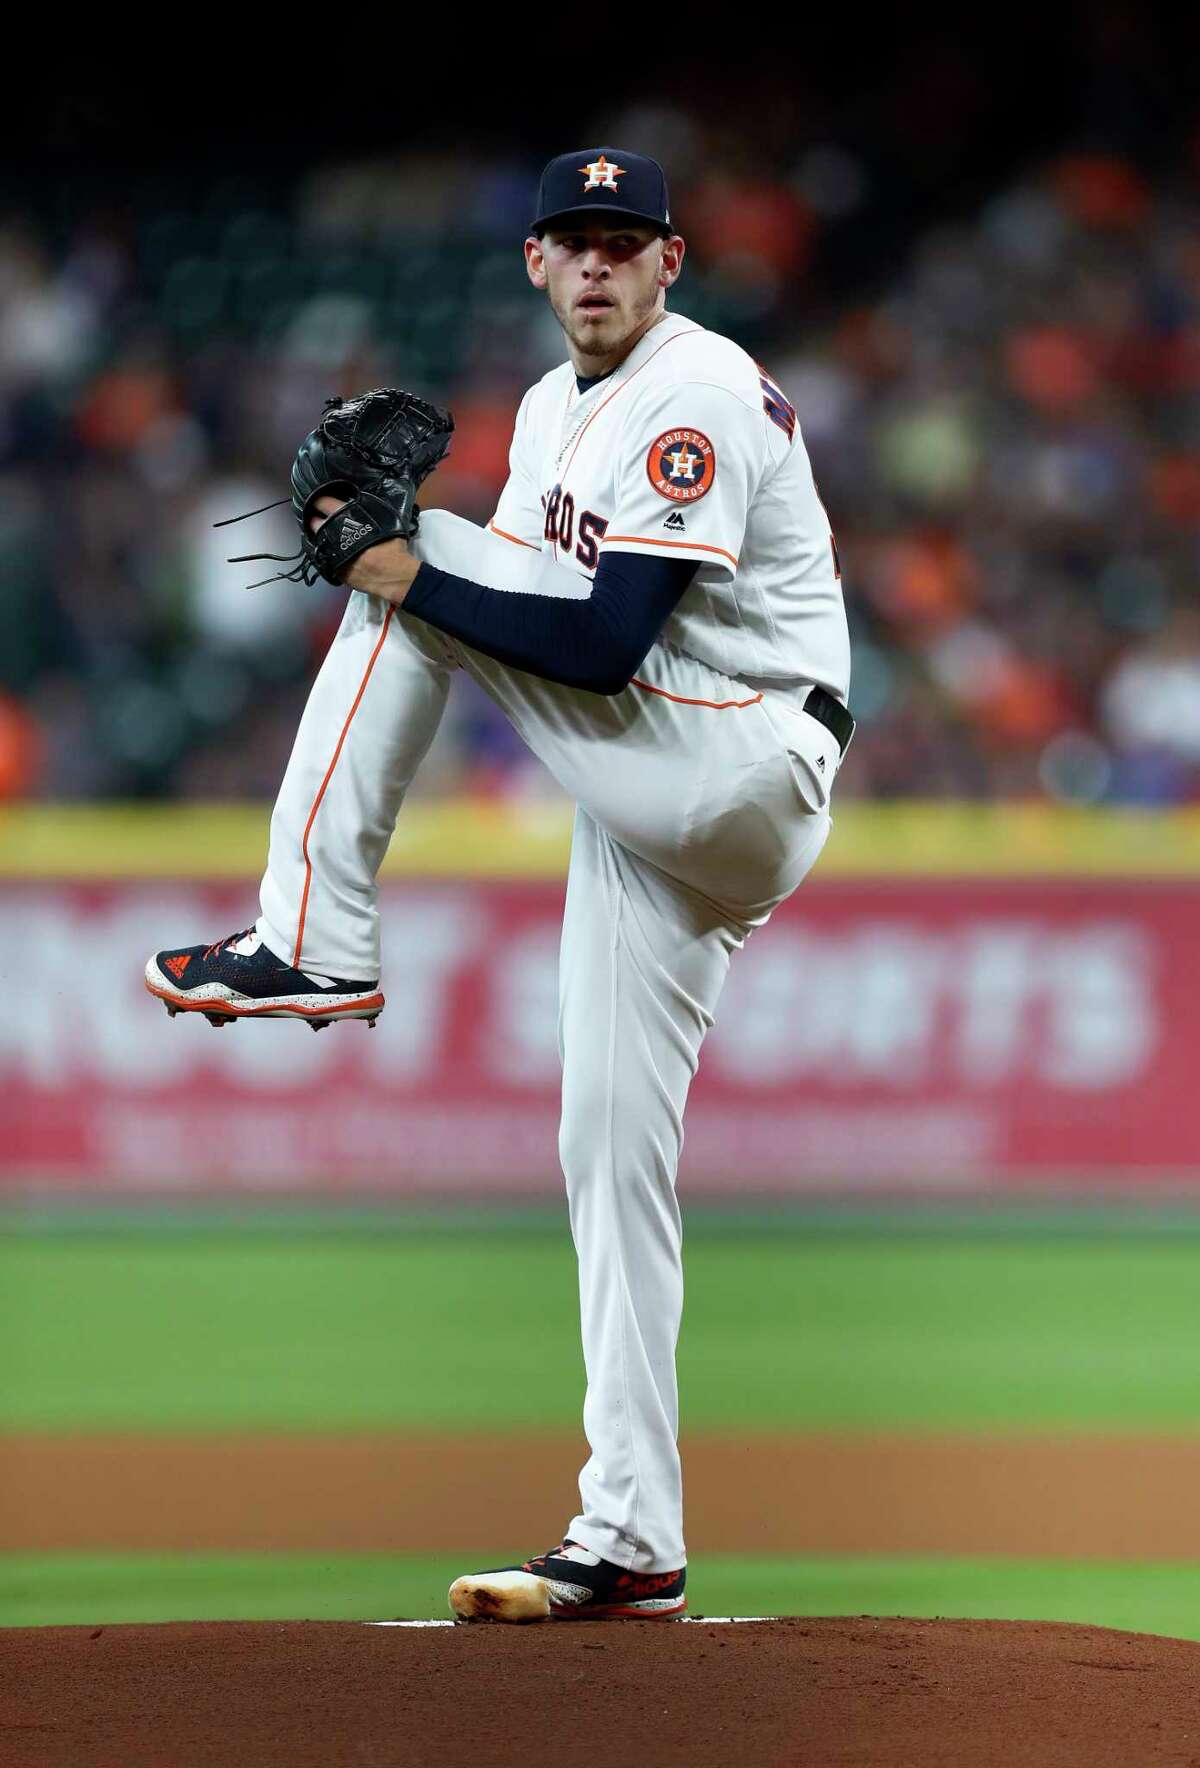 Houston Astros starting pitcher Joe Musgrove (59) pitches during the first inning of an MLB game at Minute Maid Park, Monday, June, 12, 2017. ( Karen Warren / Houston Chronicle )